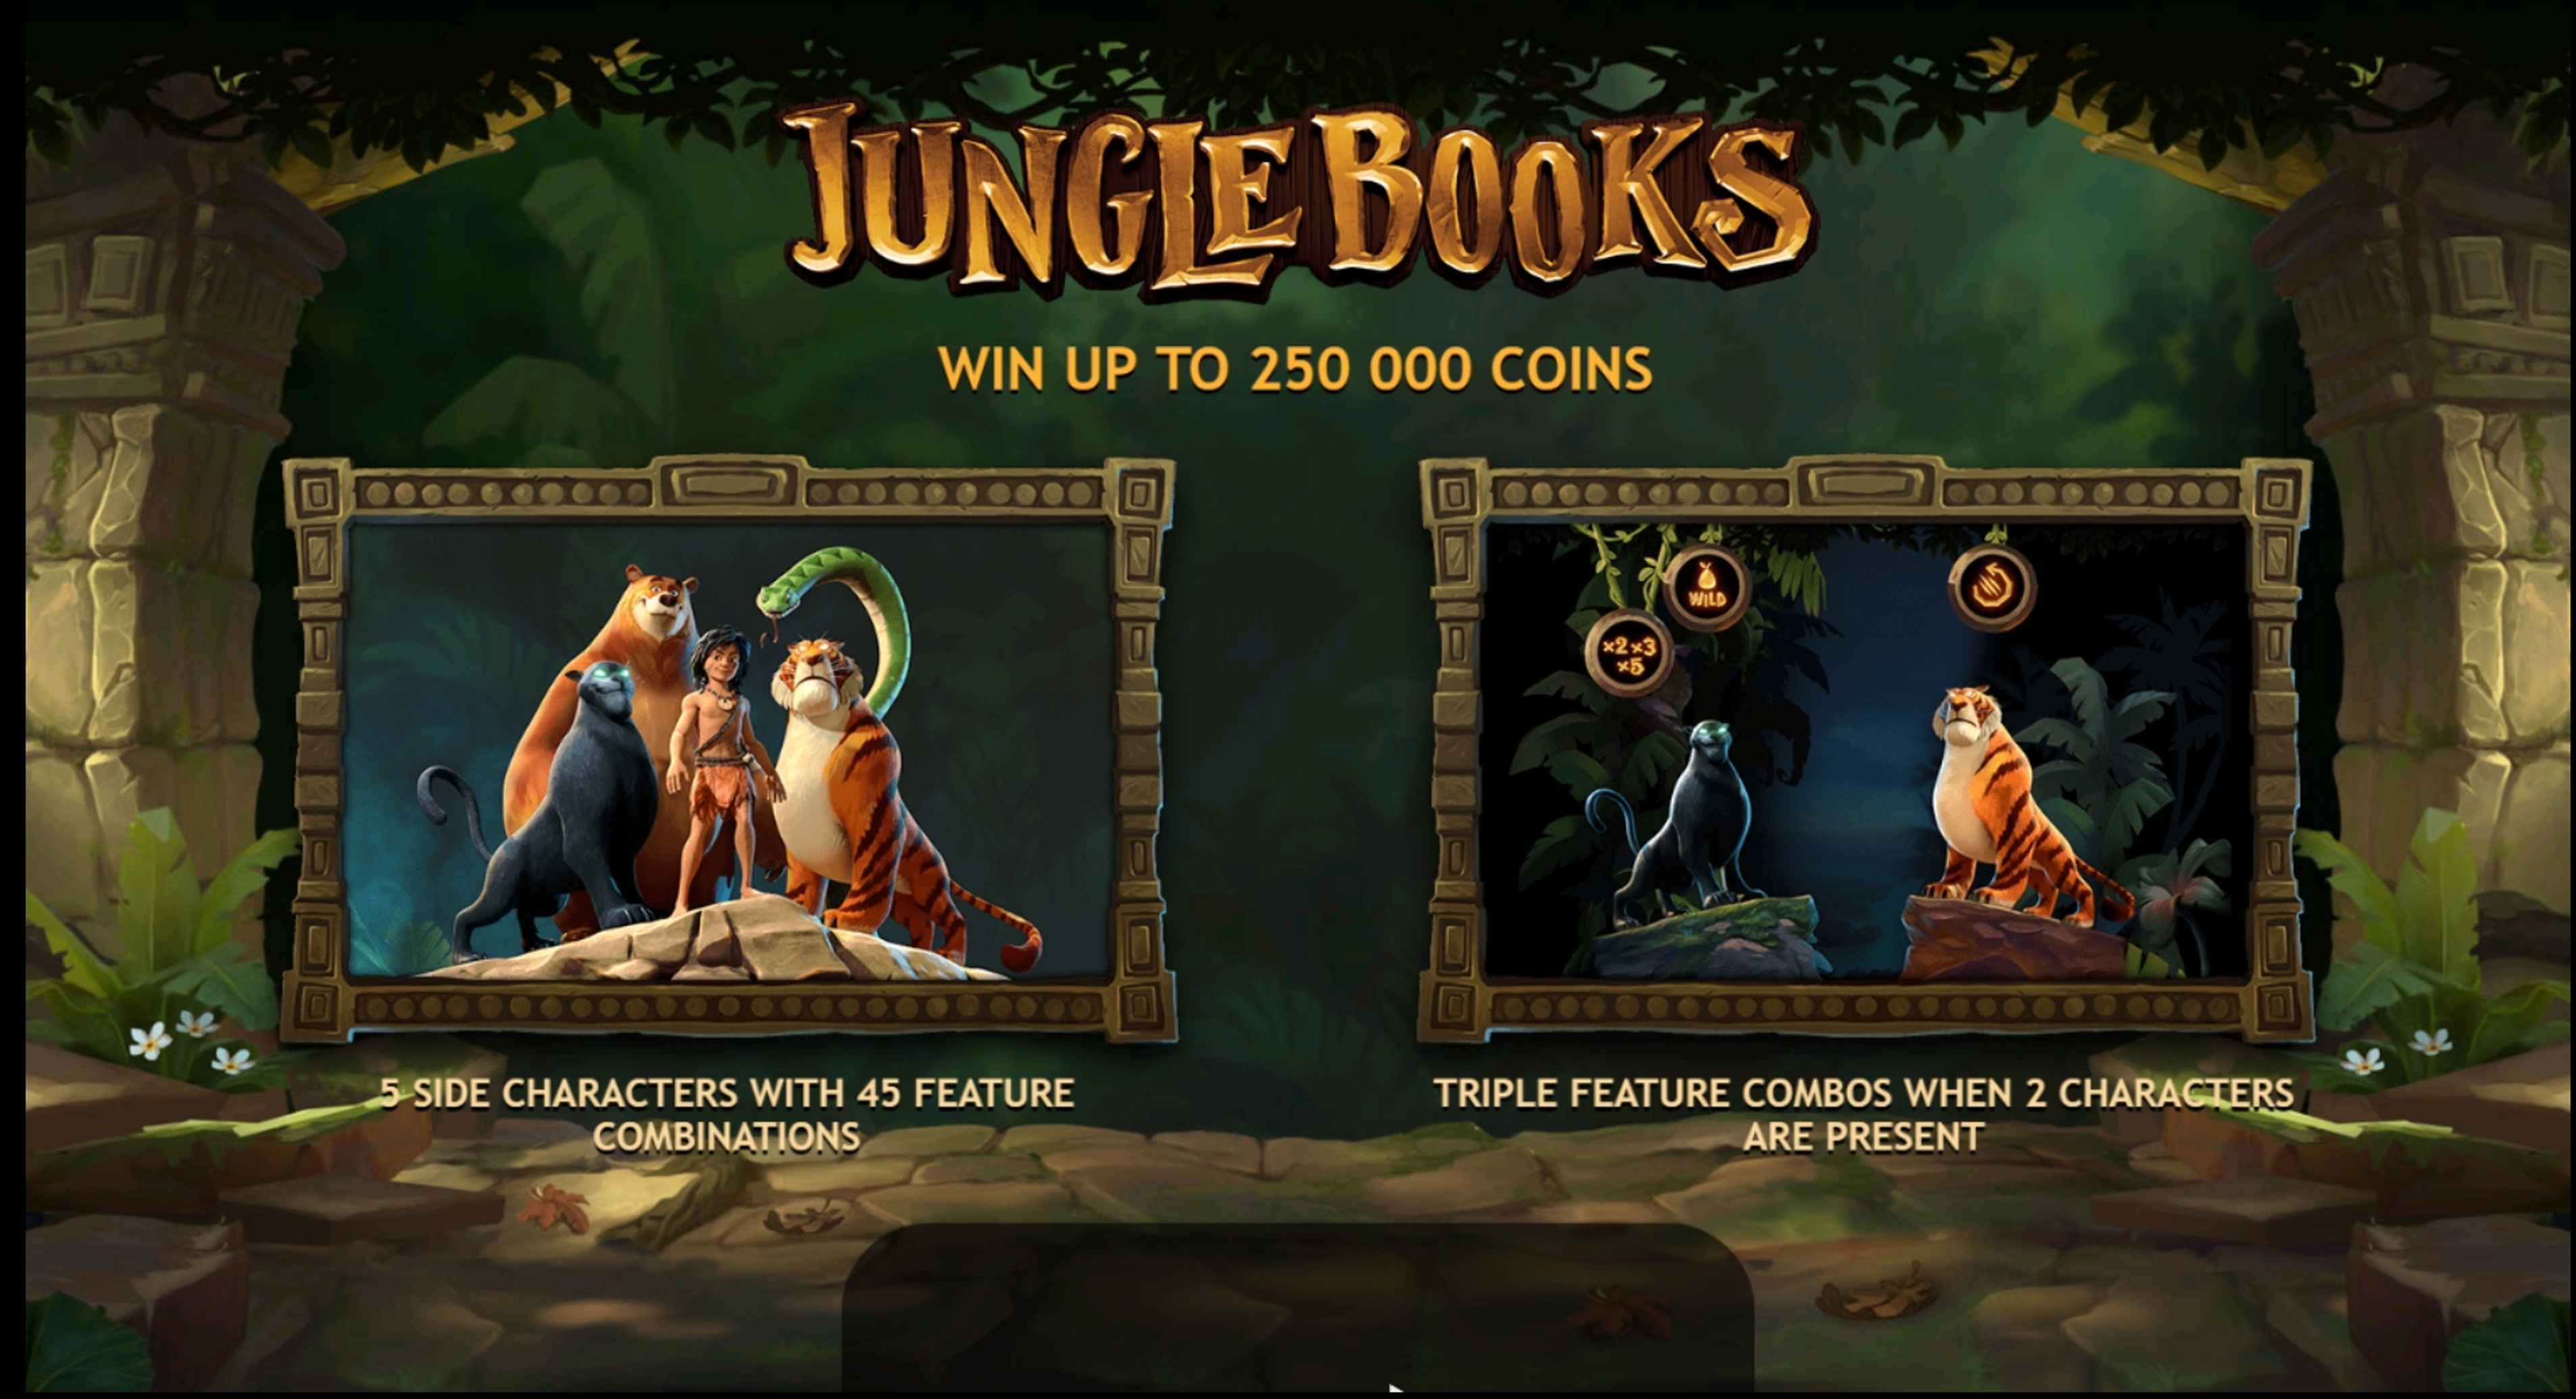 Play Jungle Books Free Casino Slot Game by Yggdrasil Gaming